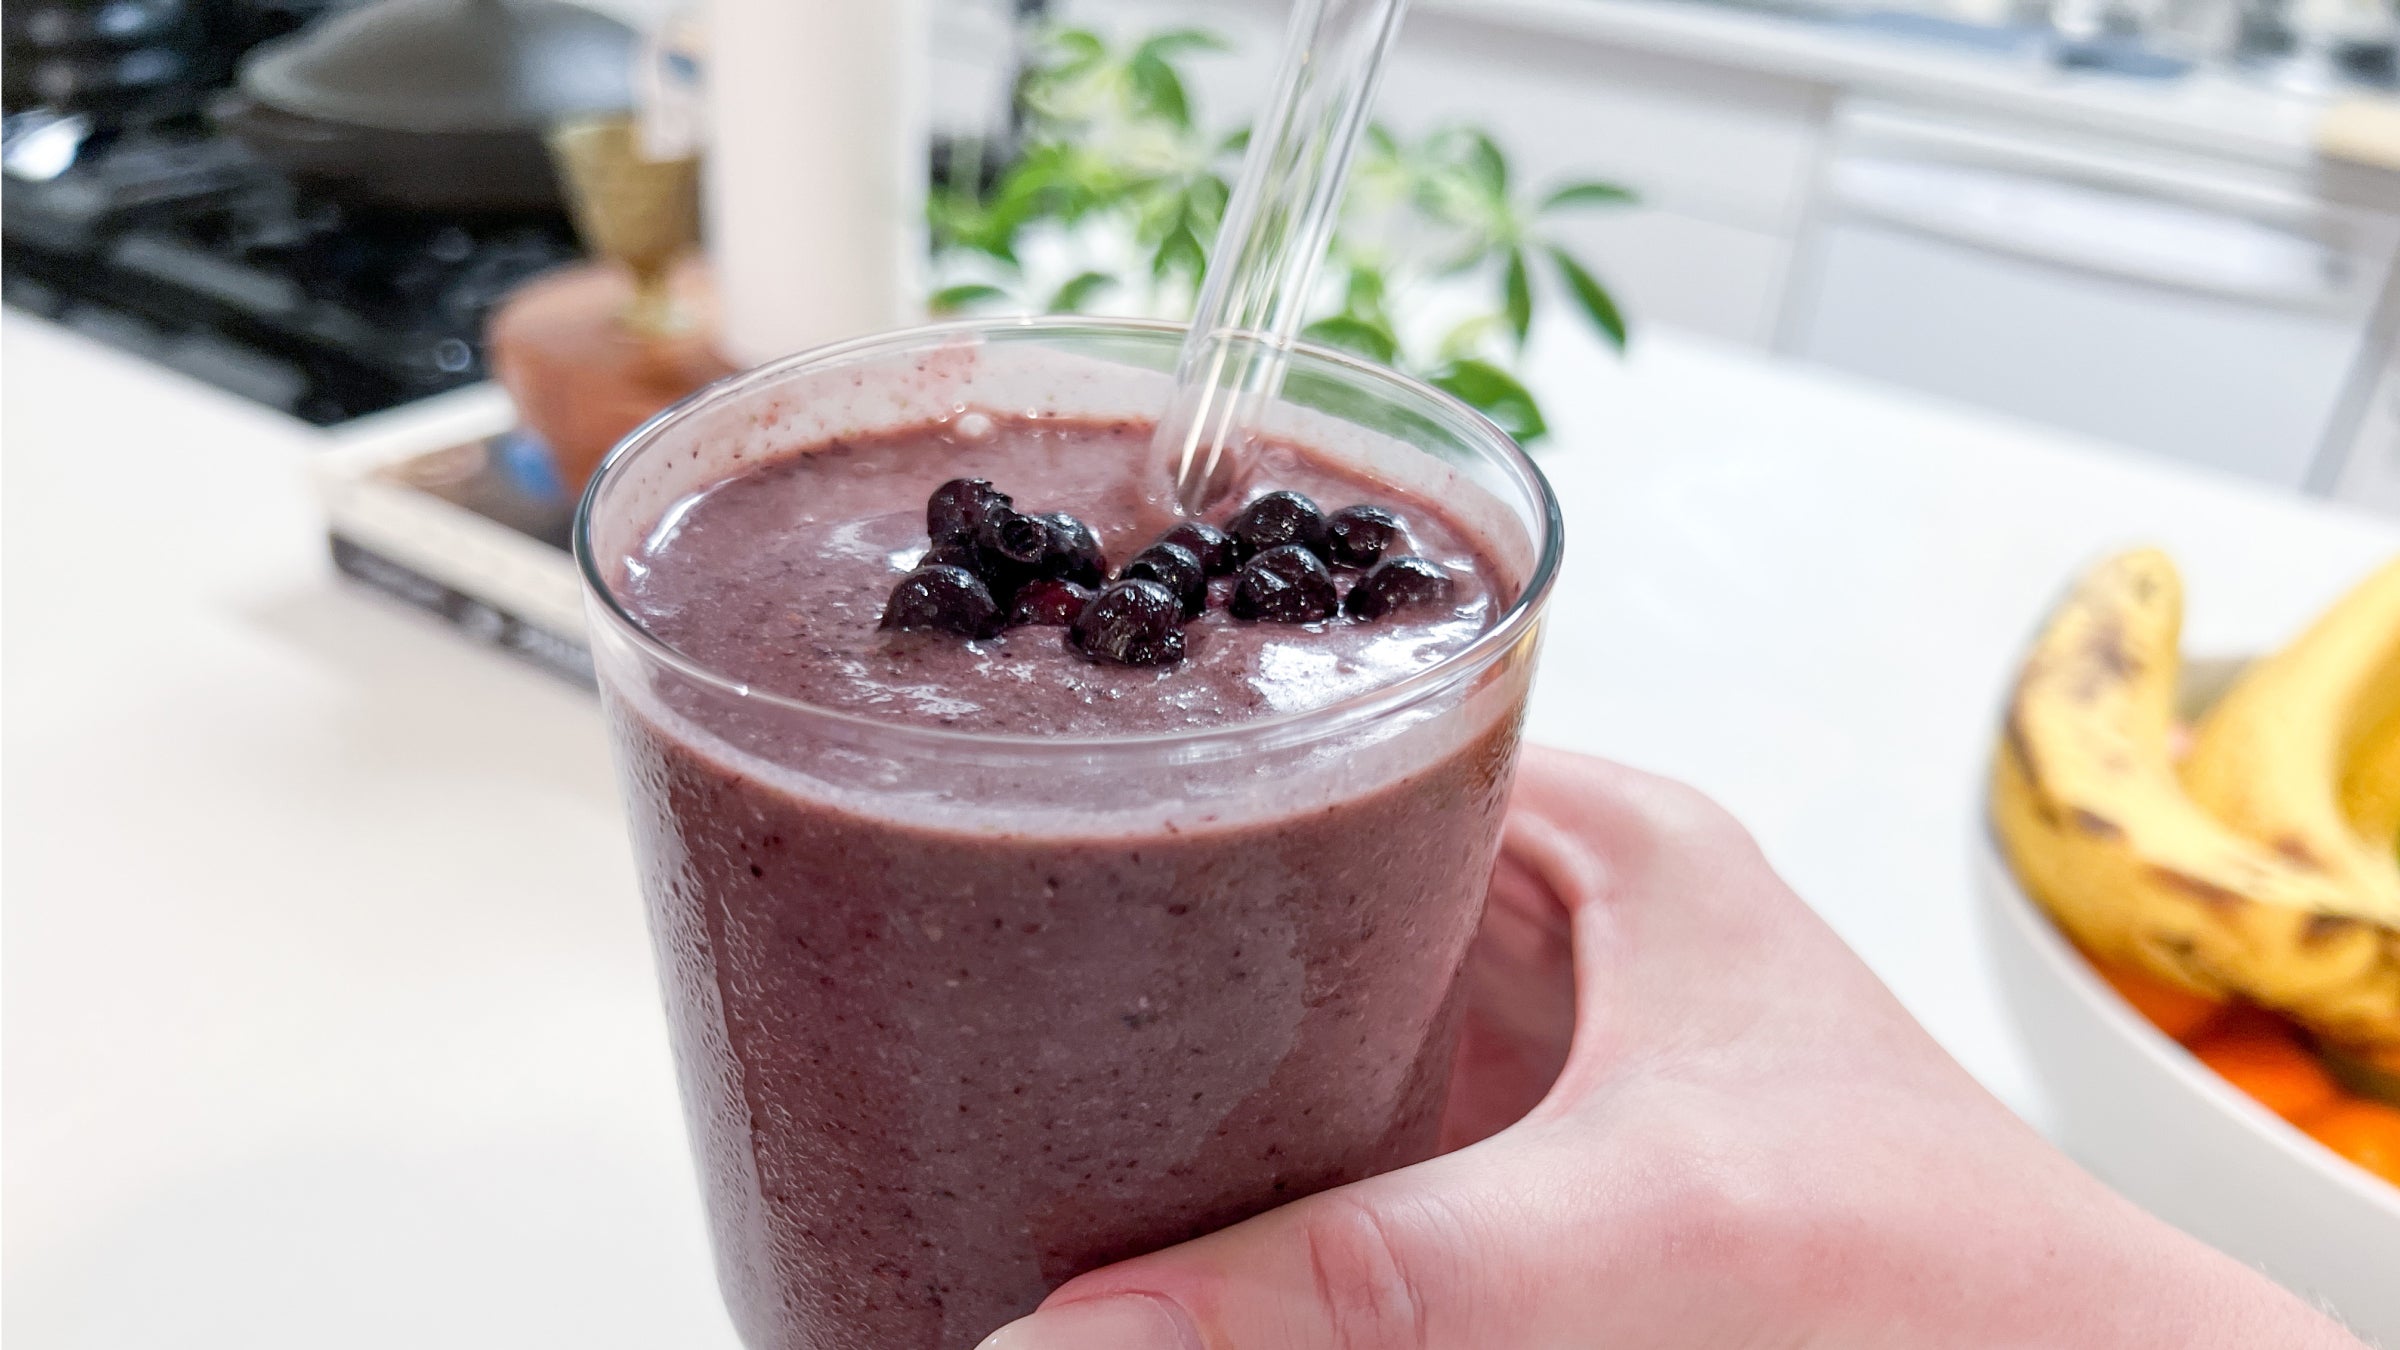 A woman toasting with a purple smoothie in a glass cup with blueberries on top